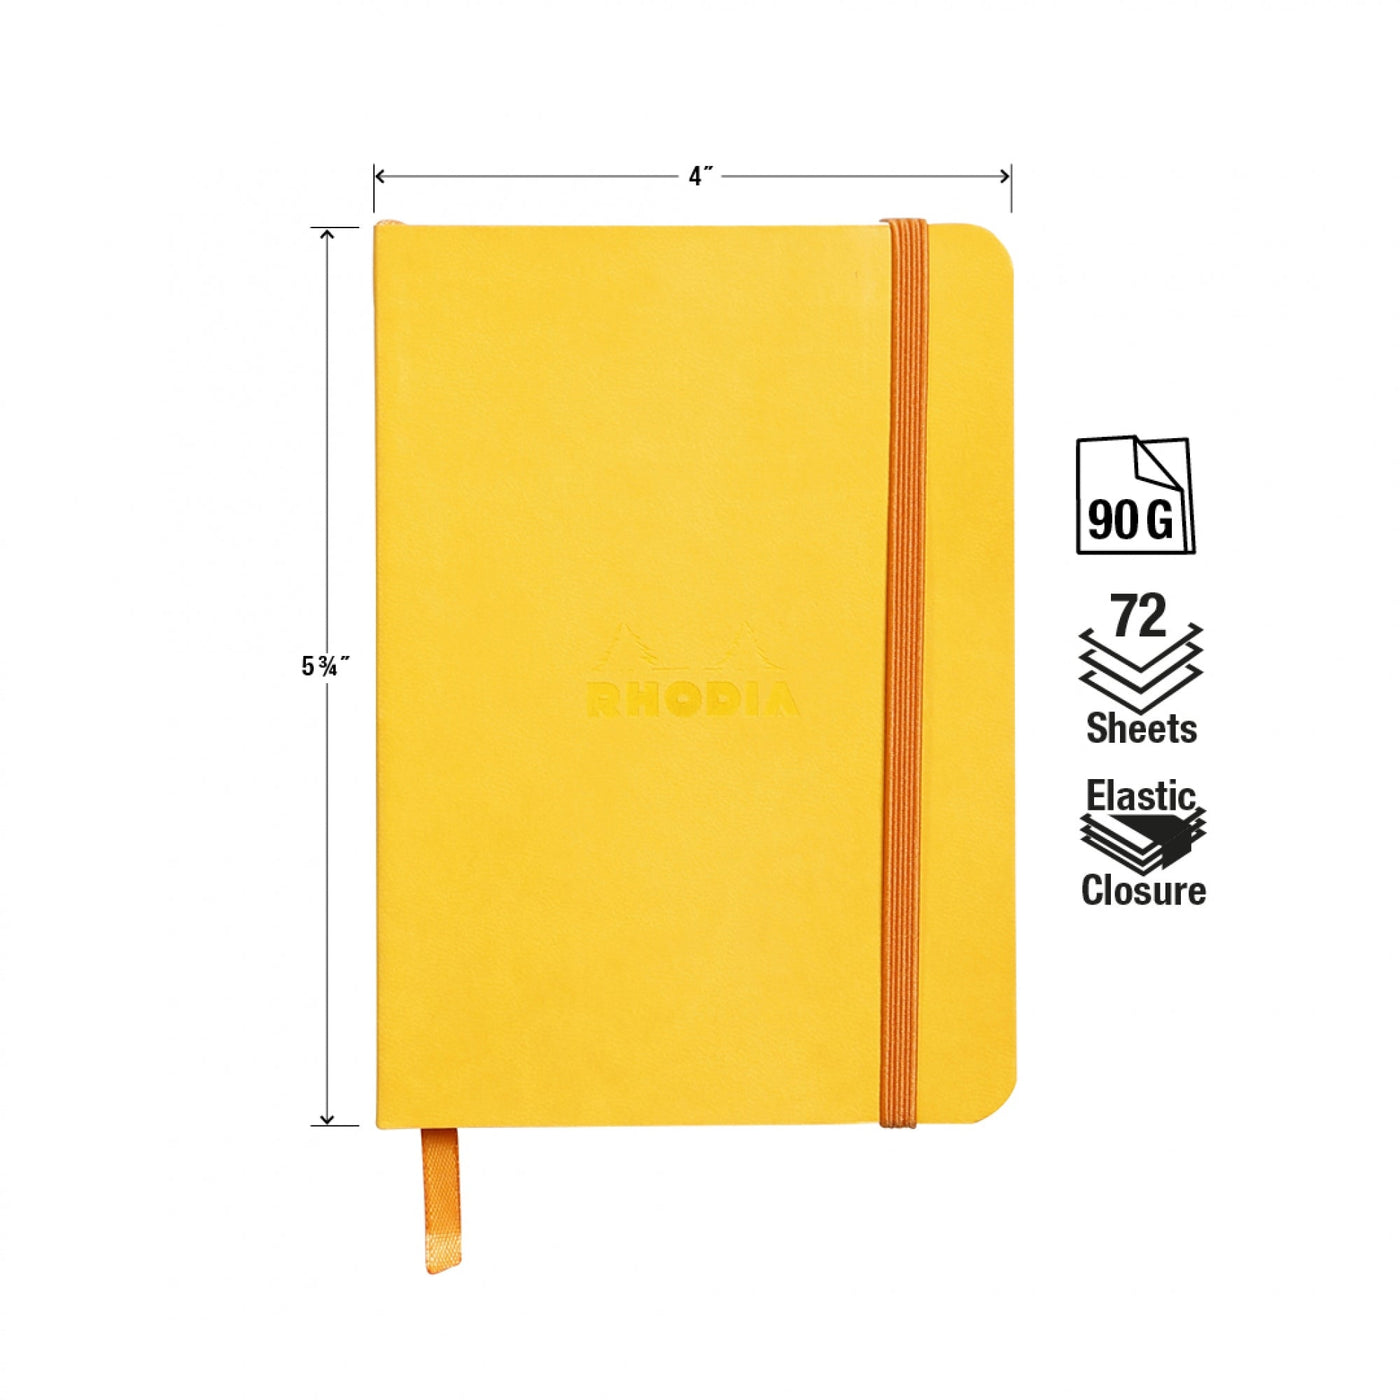 Rhodia Rhodiarama Yellow A6 Soft Cover Lined Notebook Measurements